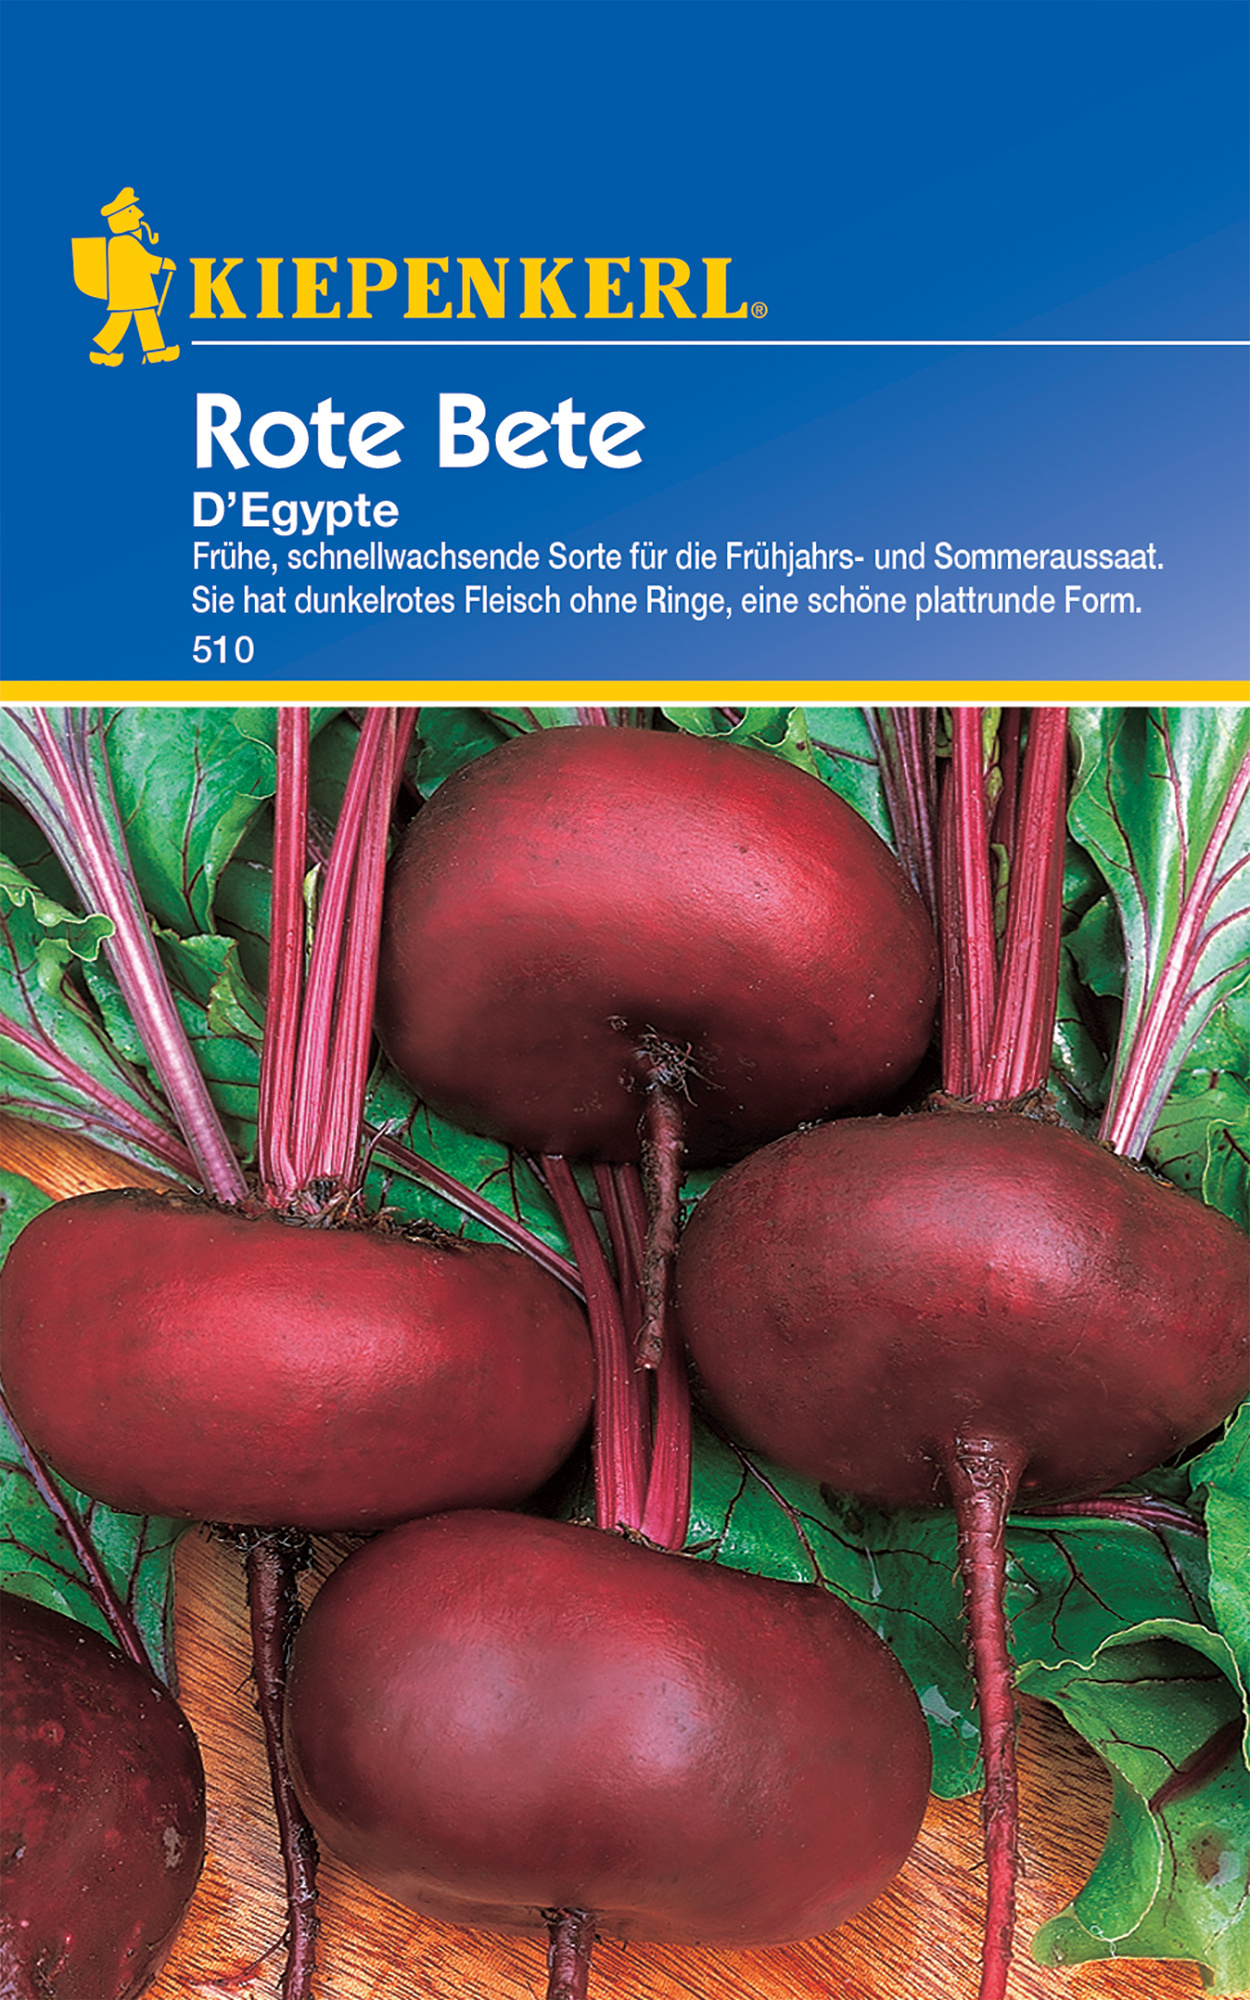 Rote Bete D'Egypte